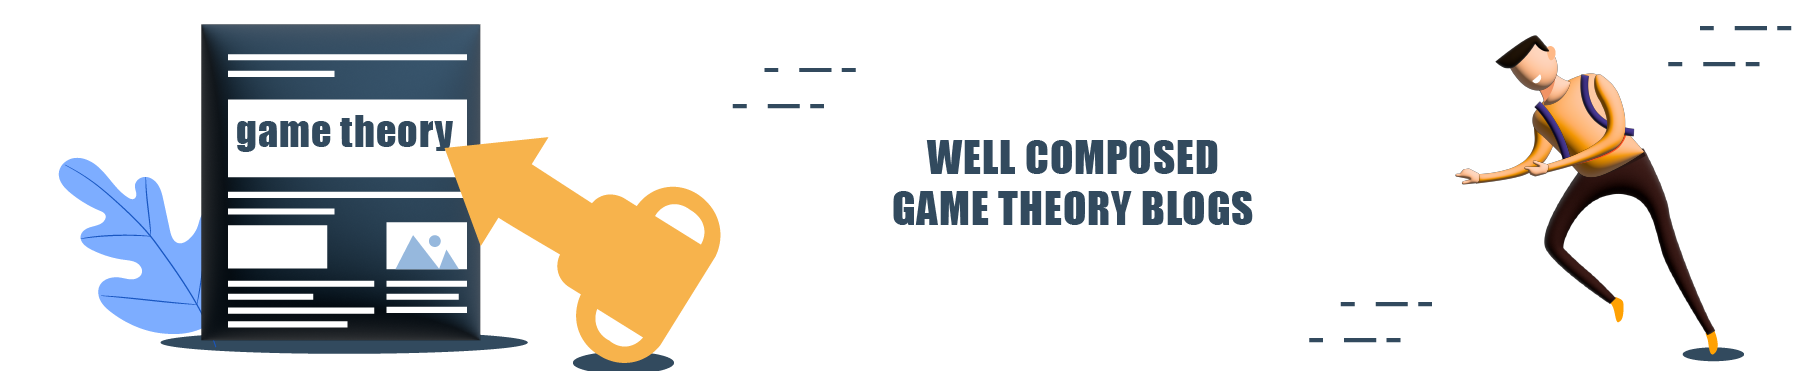 Game Theory Blogs